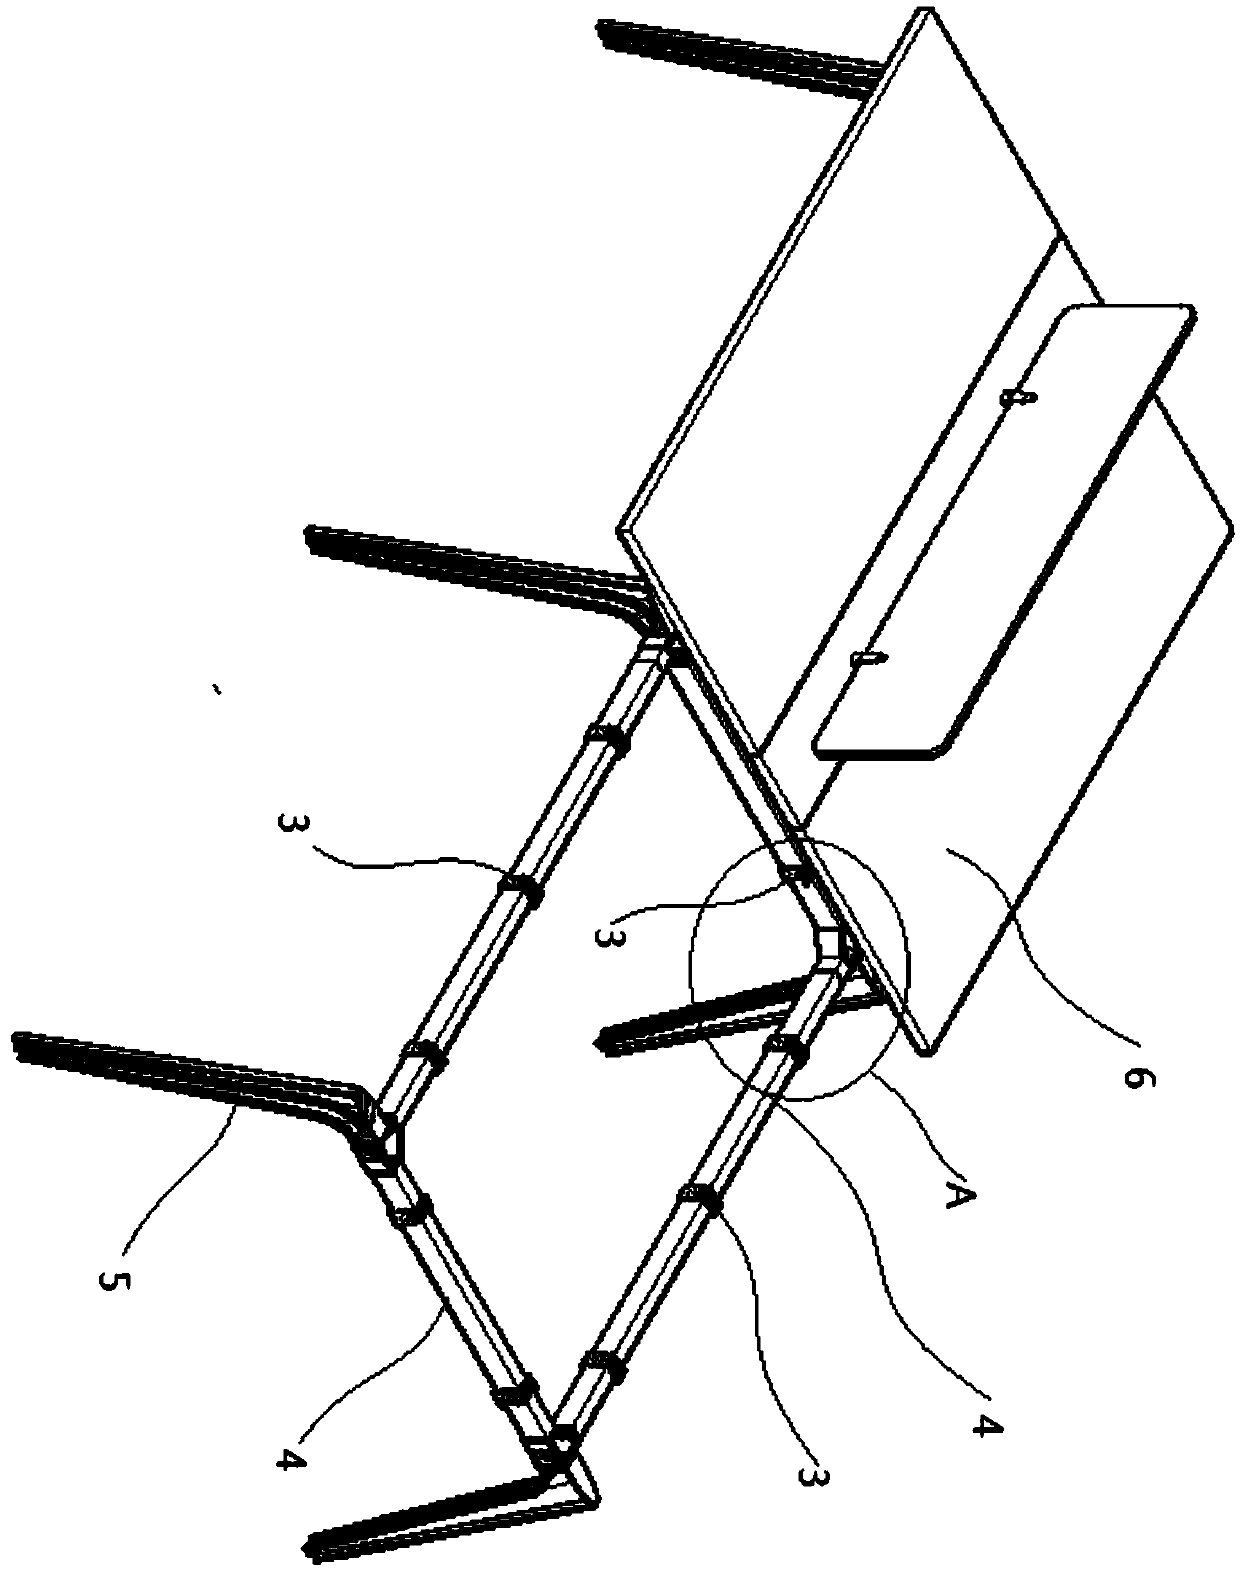 Office table with lower tabletop connecting pieces